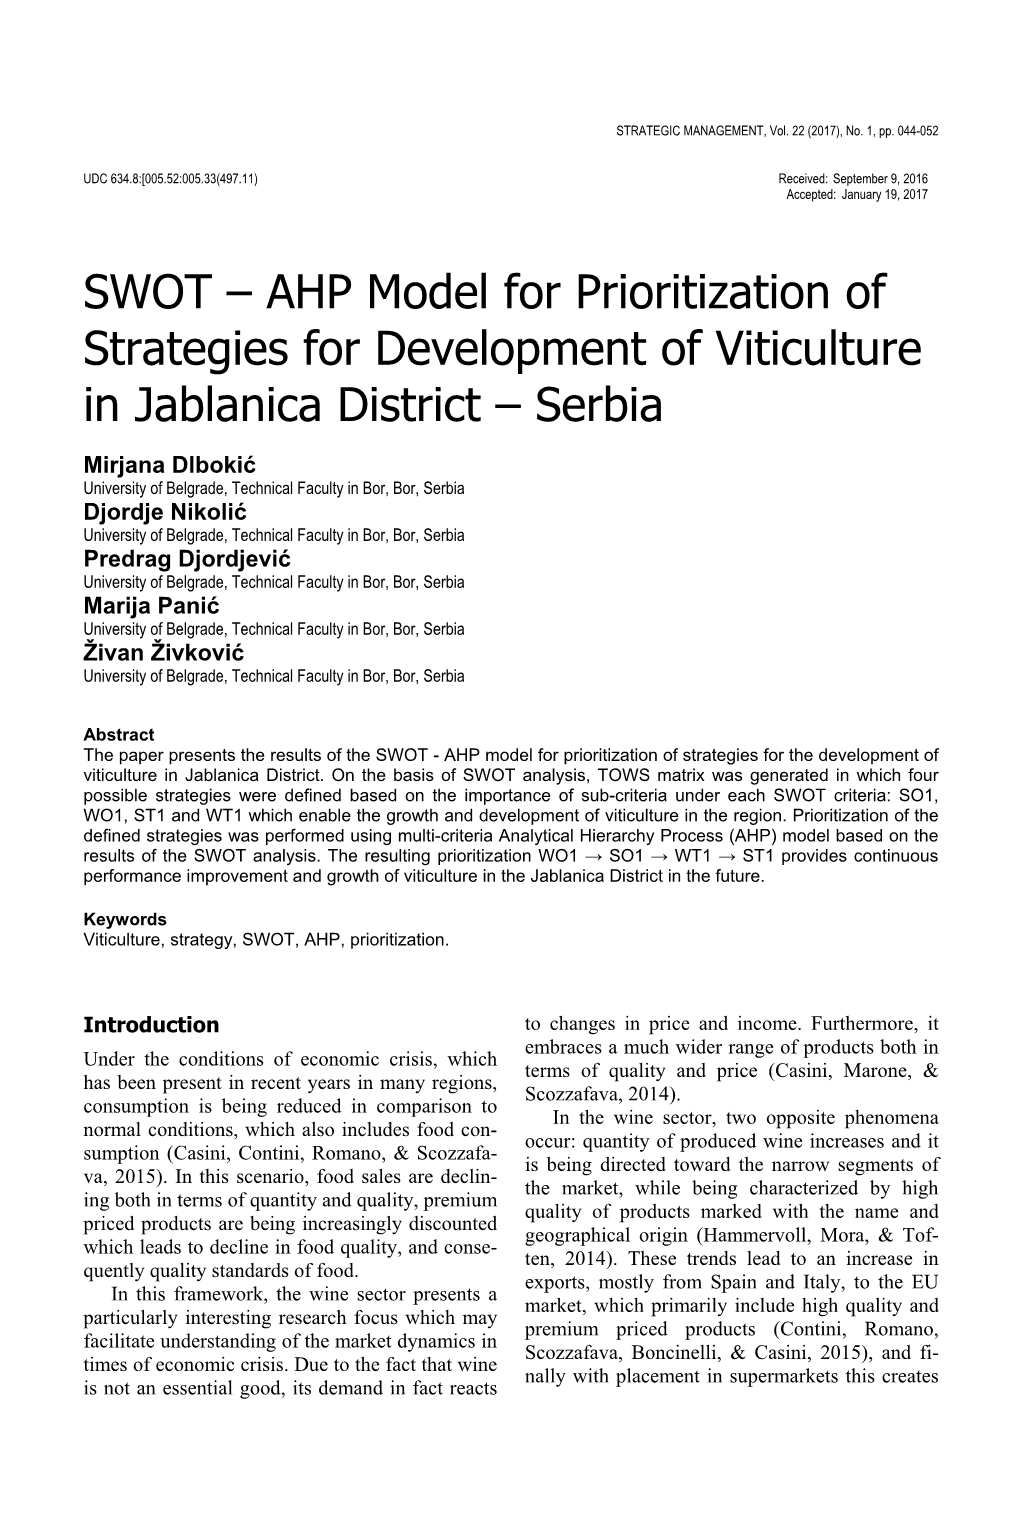 SWOT – AHP Model for Prioritization of Strategies for Development of Viticulture in Jablanica District – Serbia